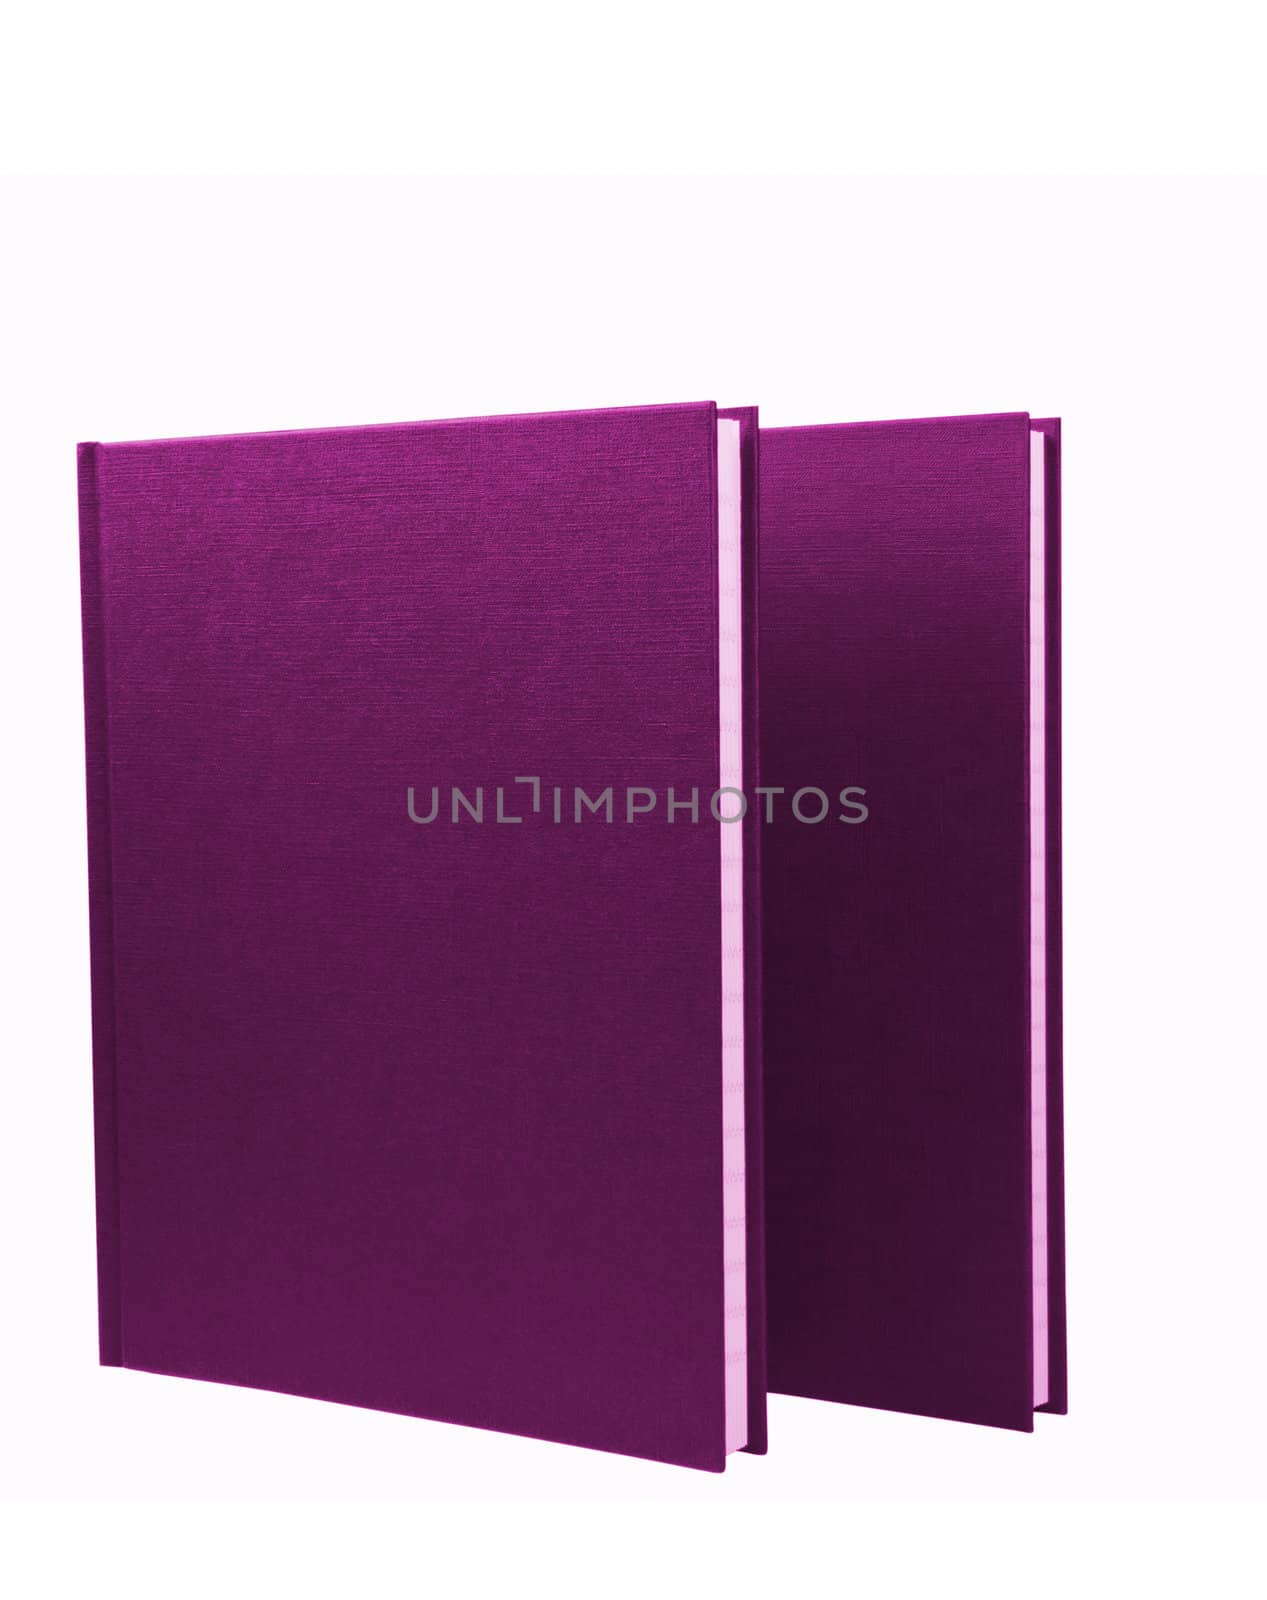 Two purple notepads isolated on white background